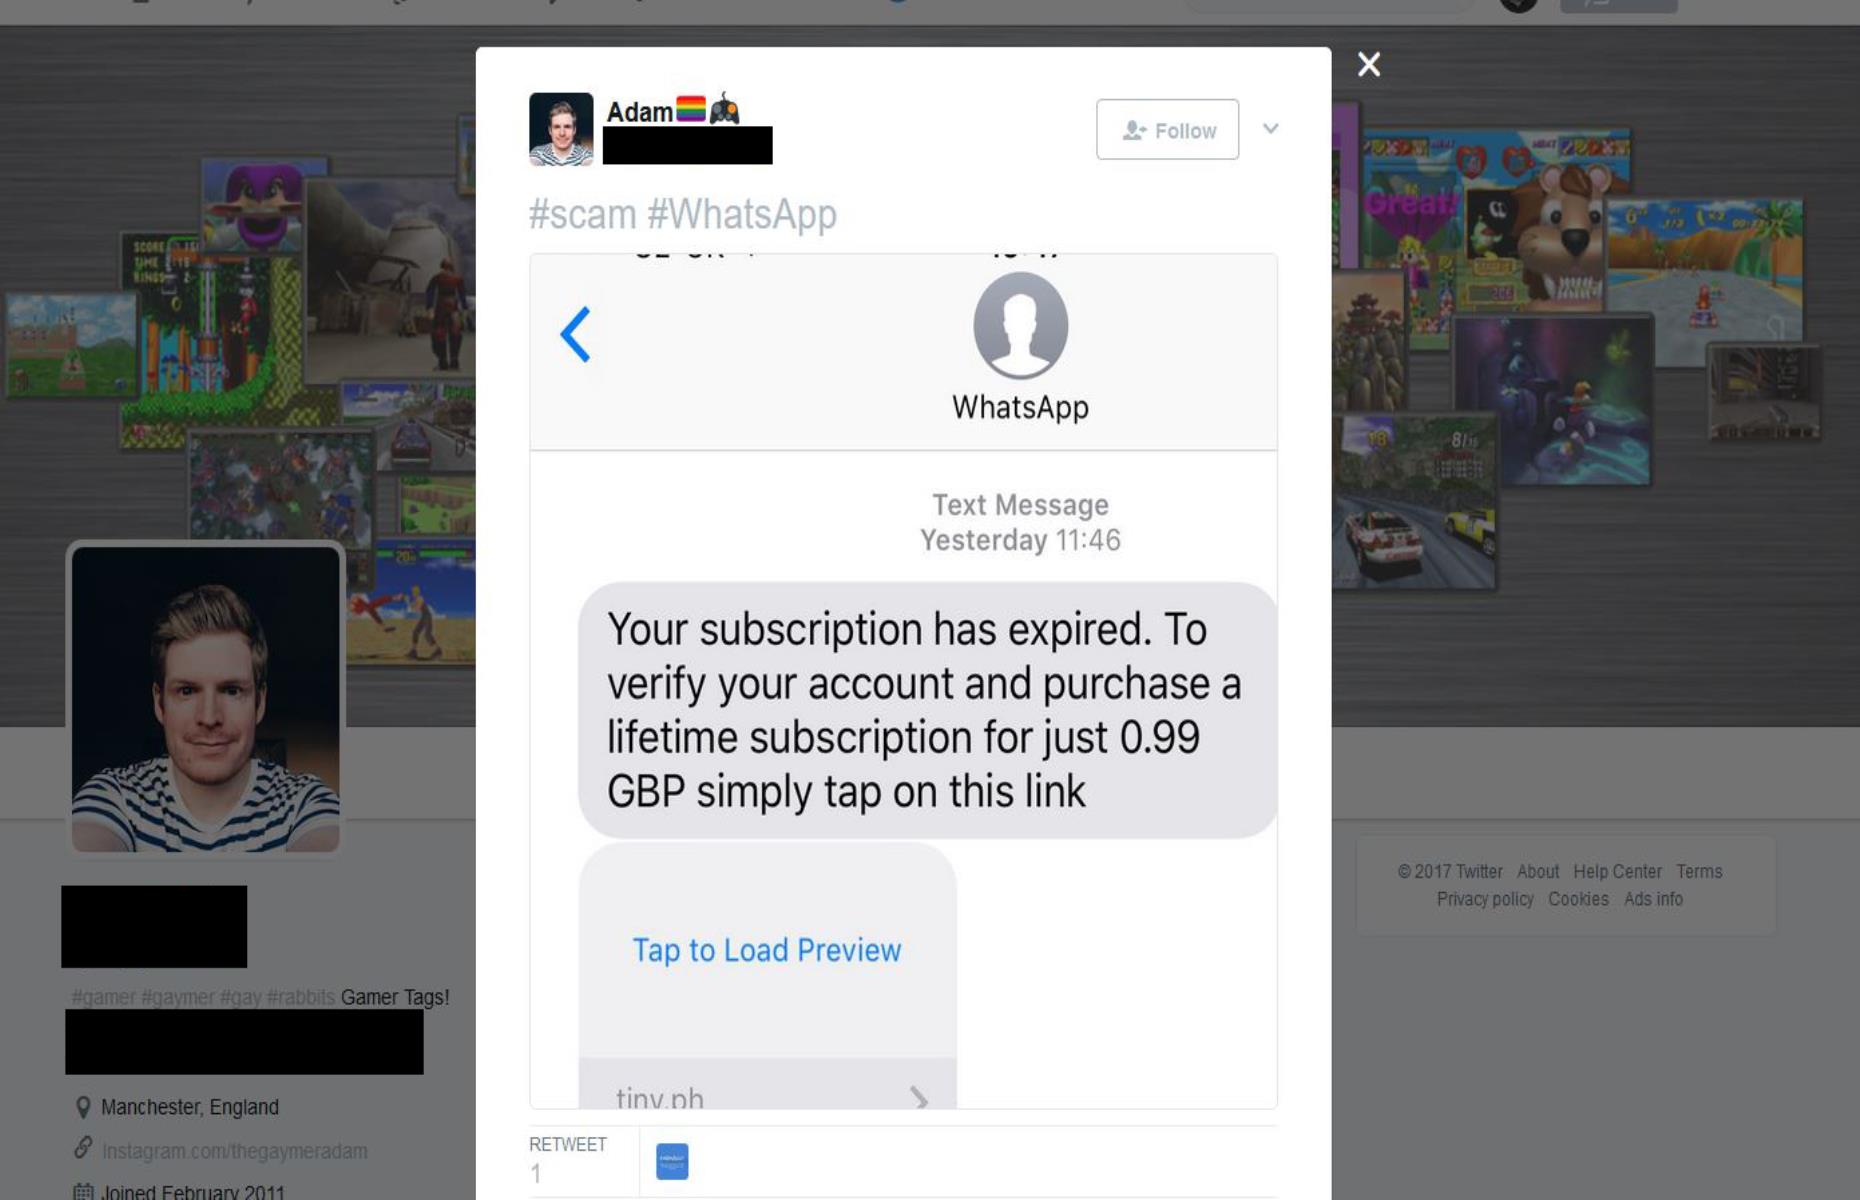 WhatsApp subscription charge scam (Image: Twitter - Adam)